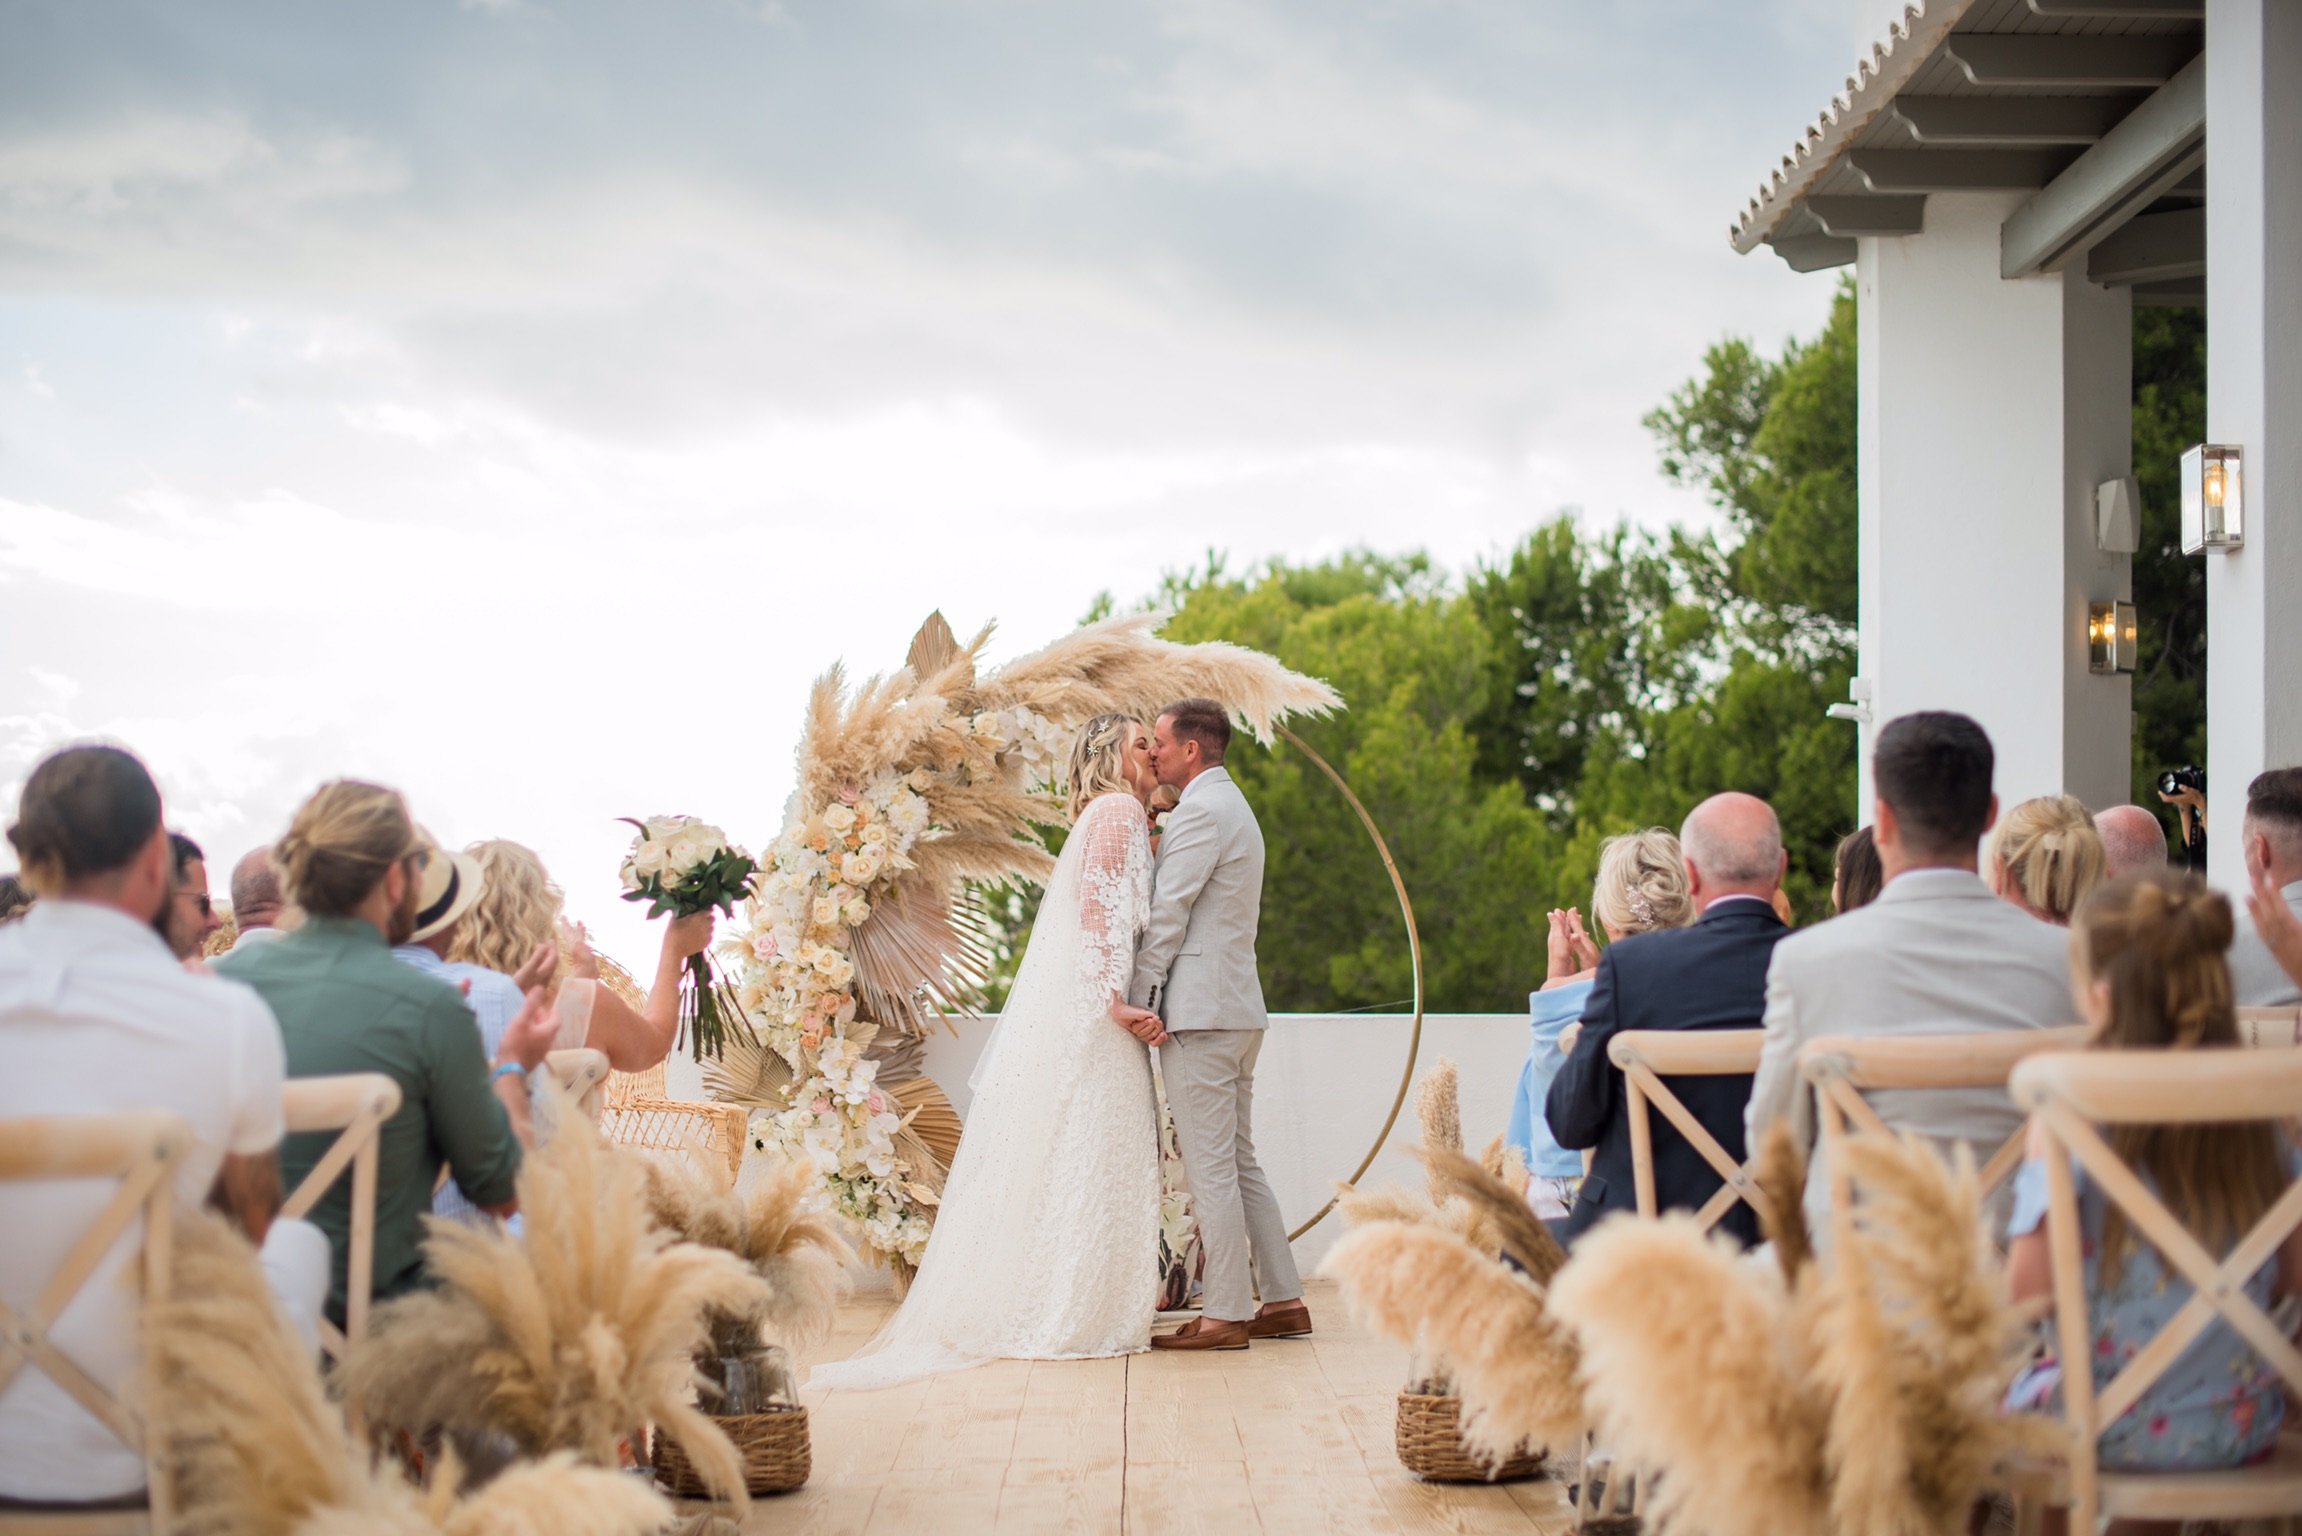 Tilly Thomas Lux Celestial hairpins and a Grace Loves Lace gown for an Ibiza wedding